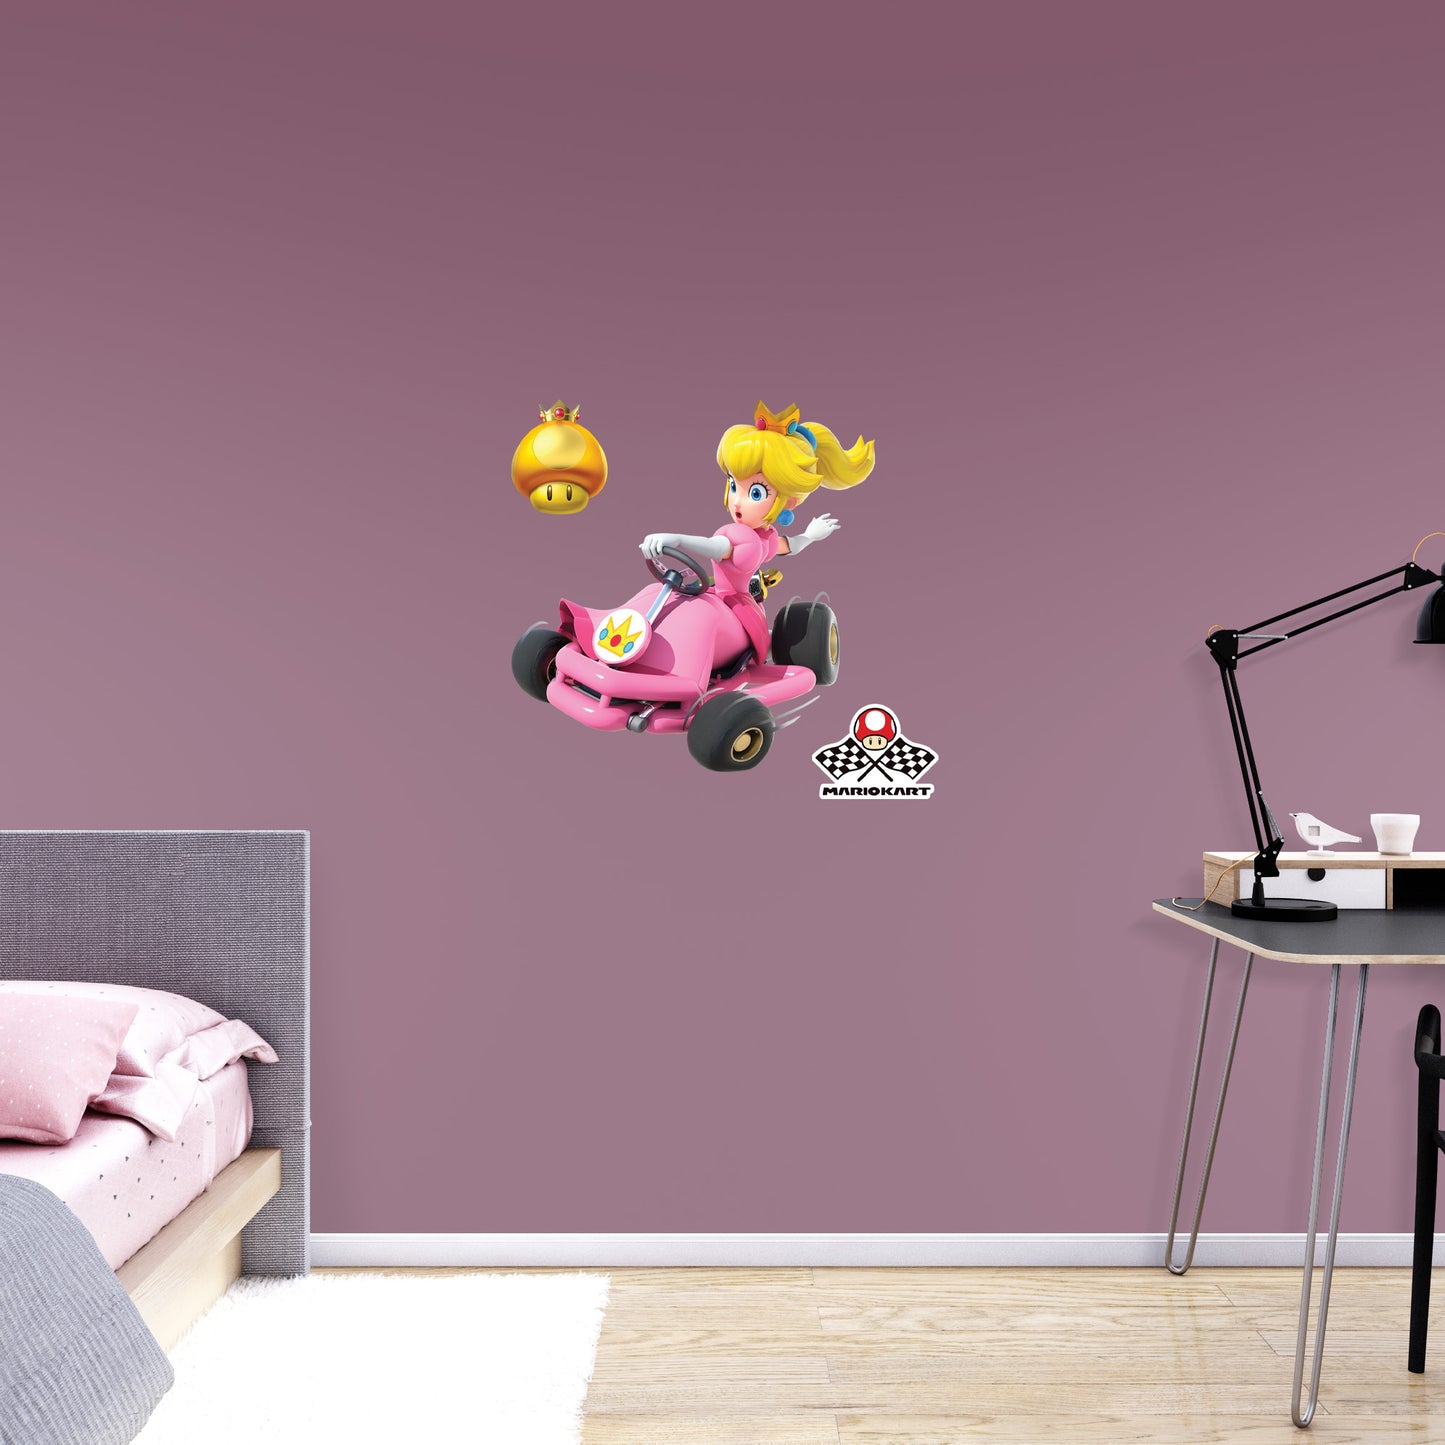 Mario Kart: Princess Peach RealBig        - Officially Licensed Nintendo Removable     Adhesive Decal